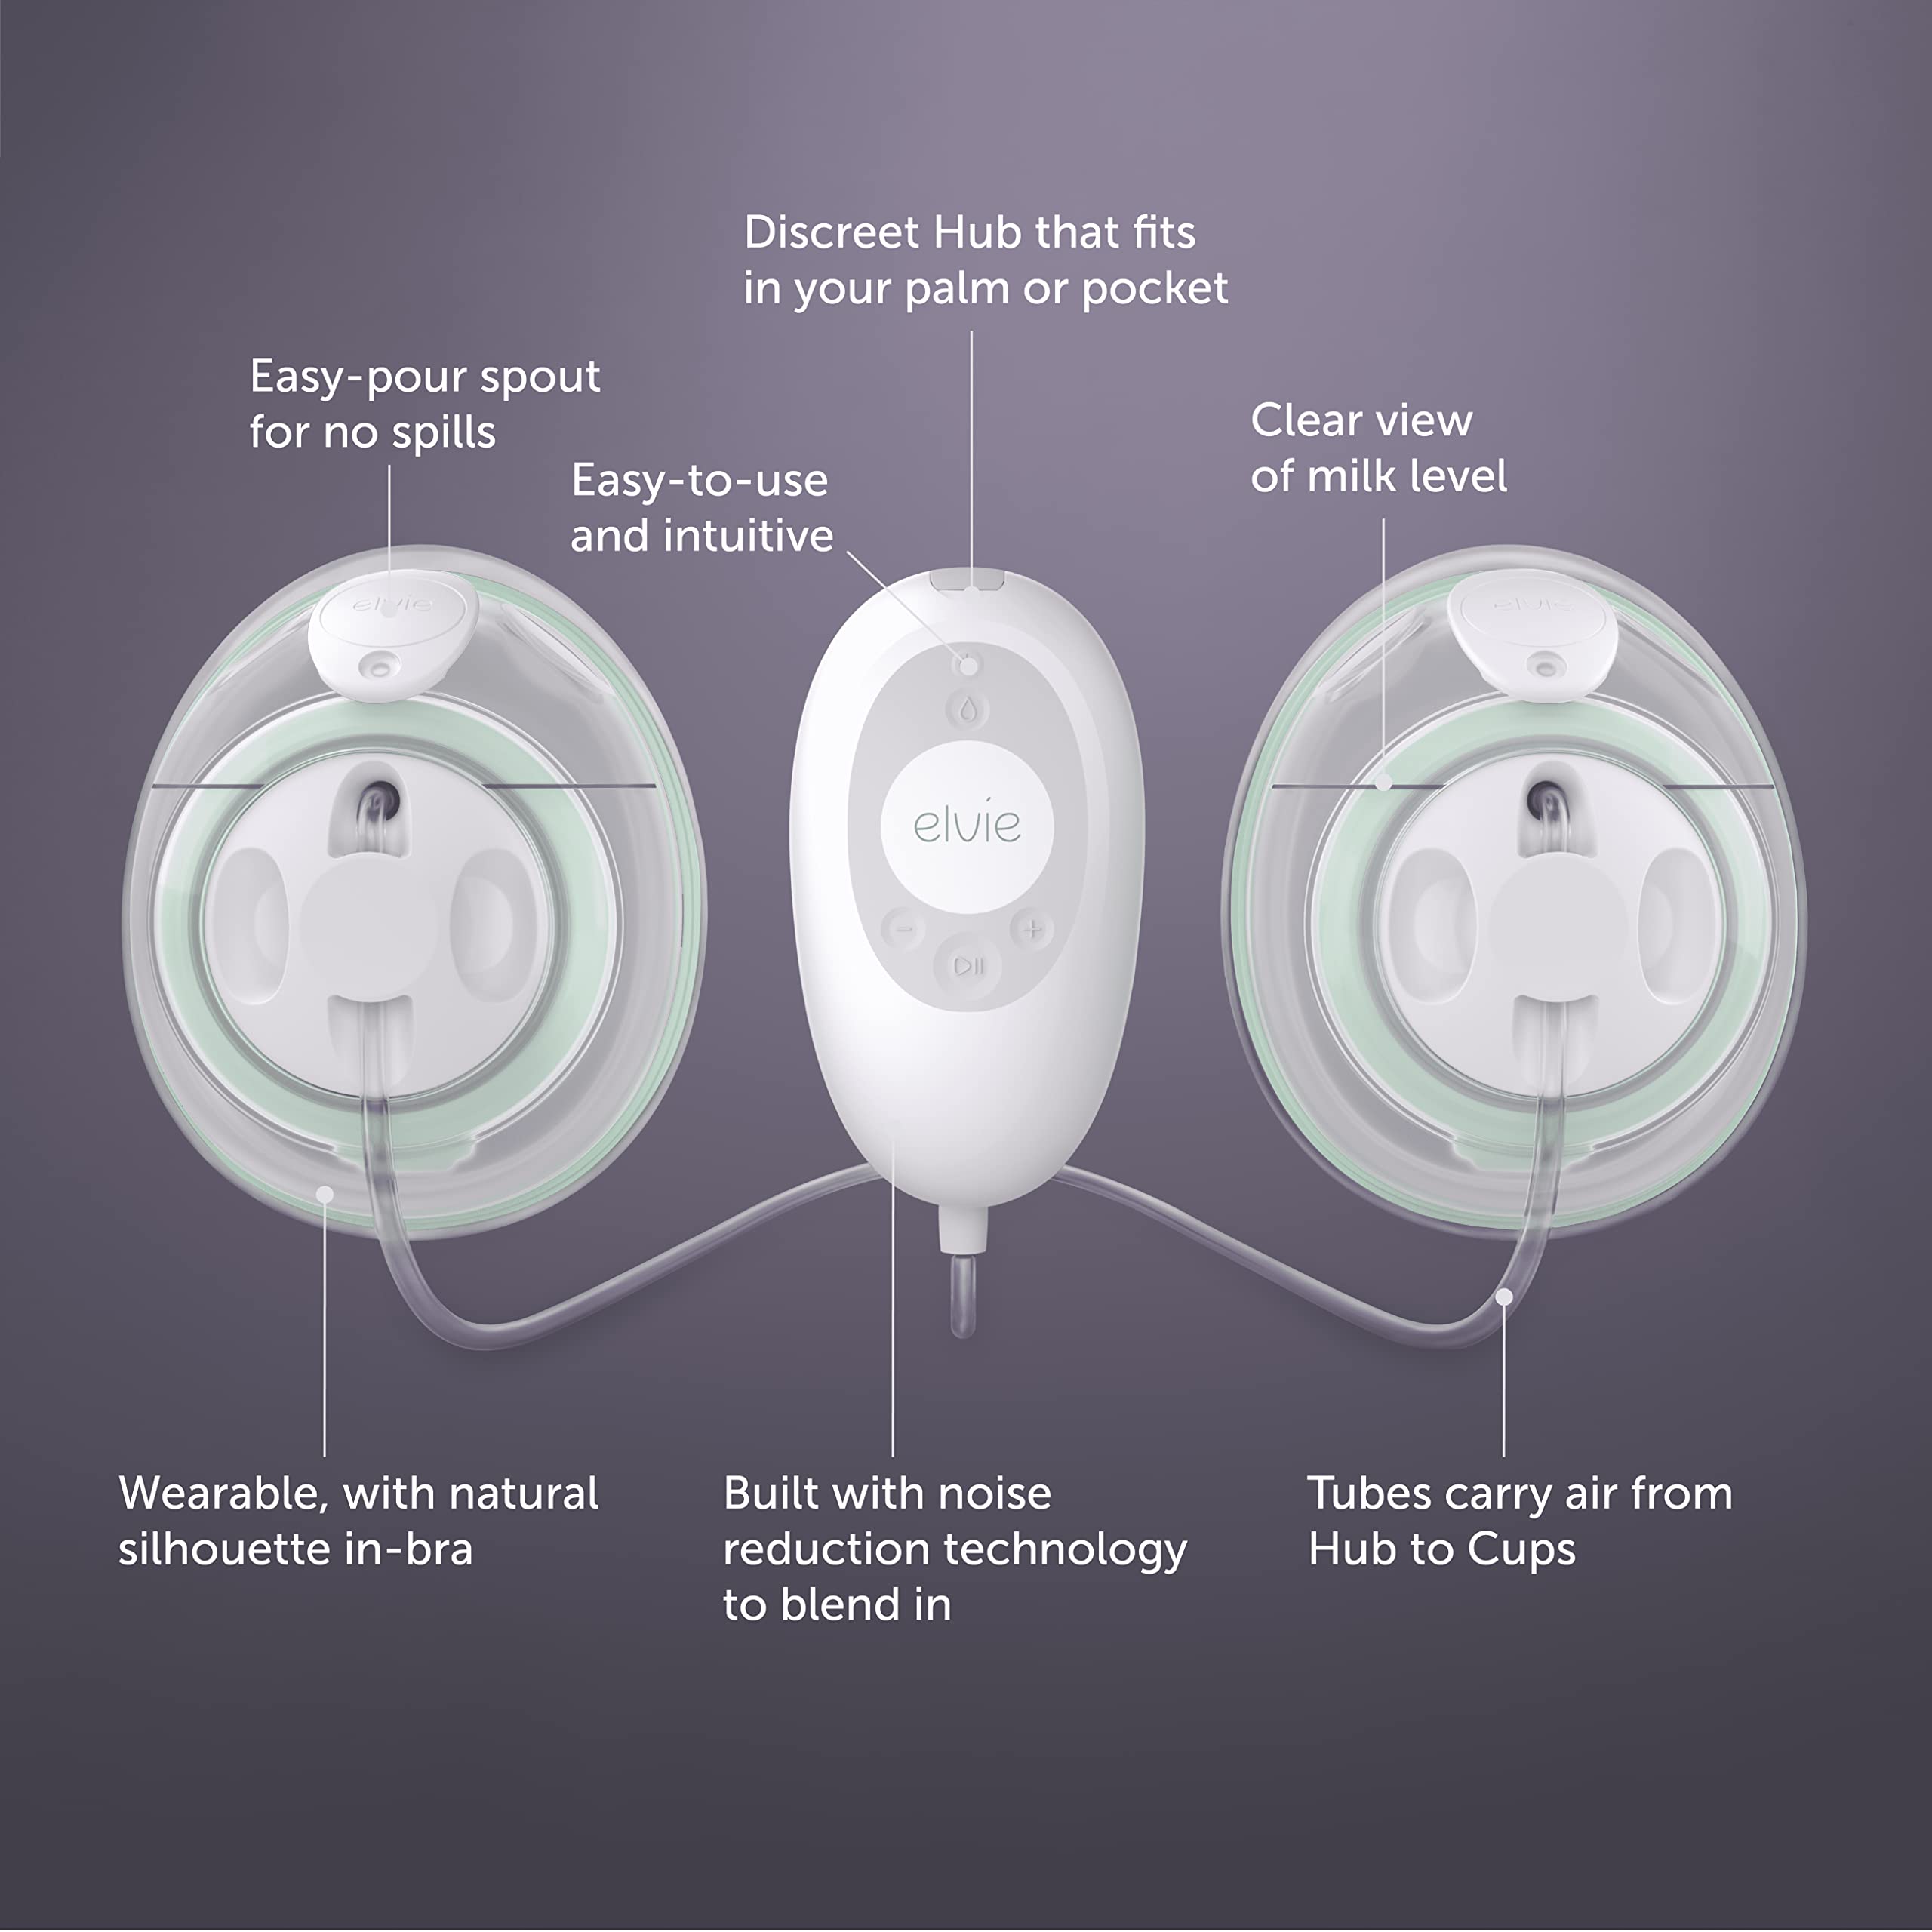 Elvie Stride Hospital-Grade App-Controlled Breast Pump | Hands-Free Wearable Ultra-Quiet Electric Breast Pump with 2-Modes 10-Settings & 5oz Capacity per Cup